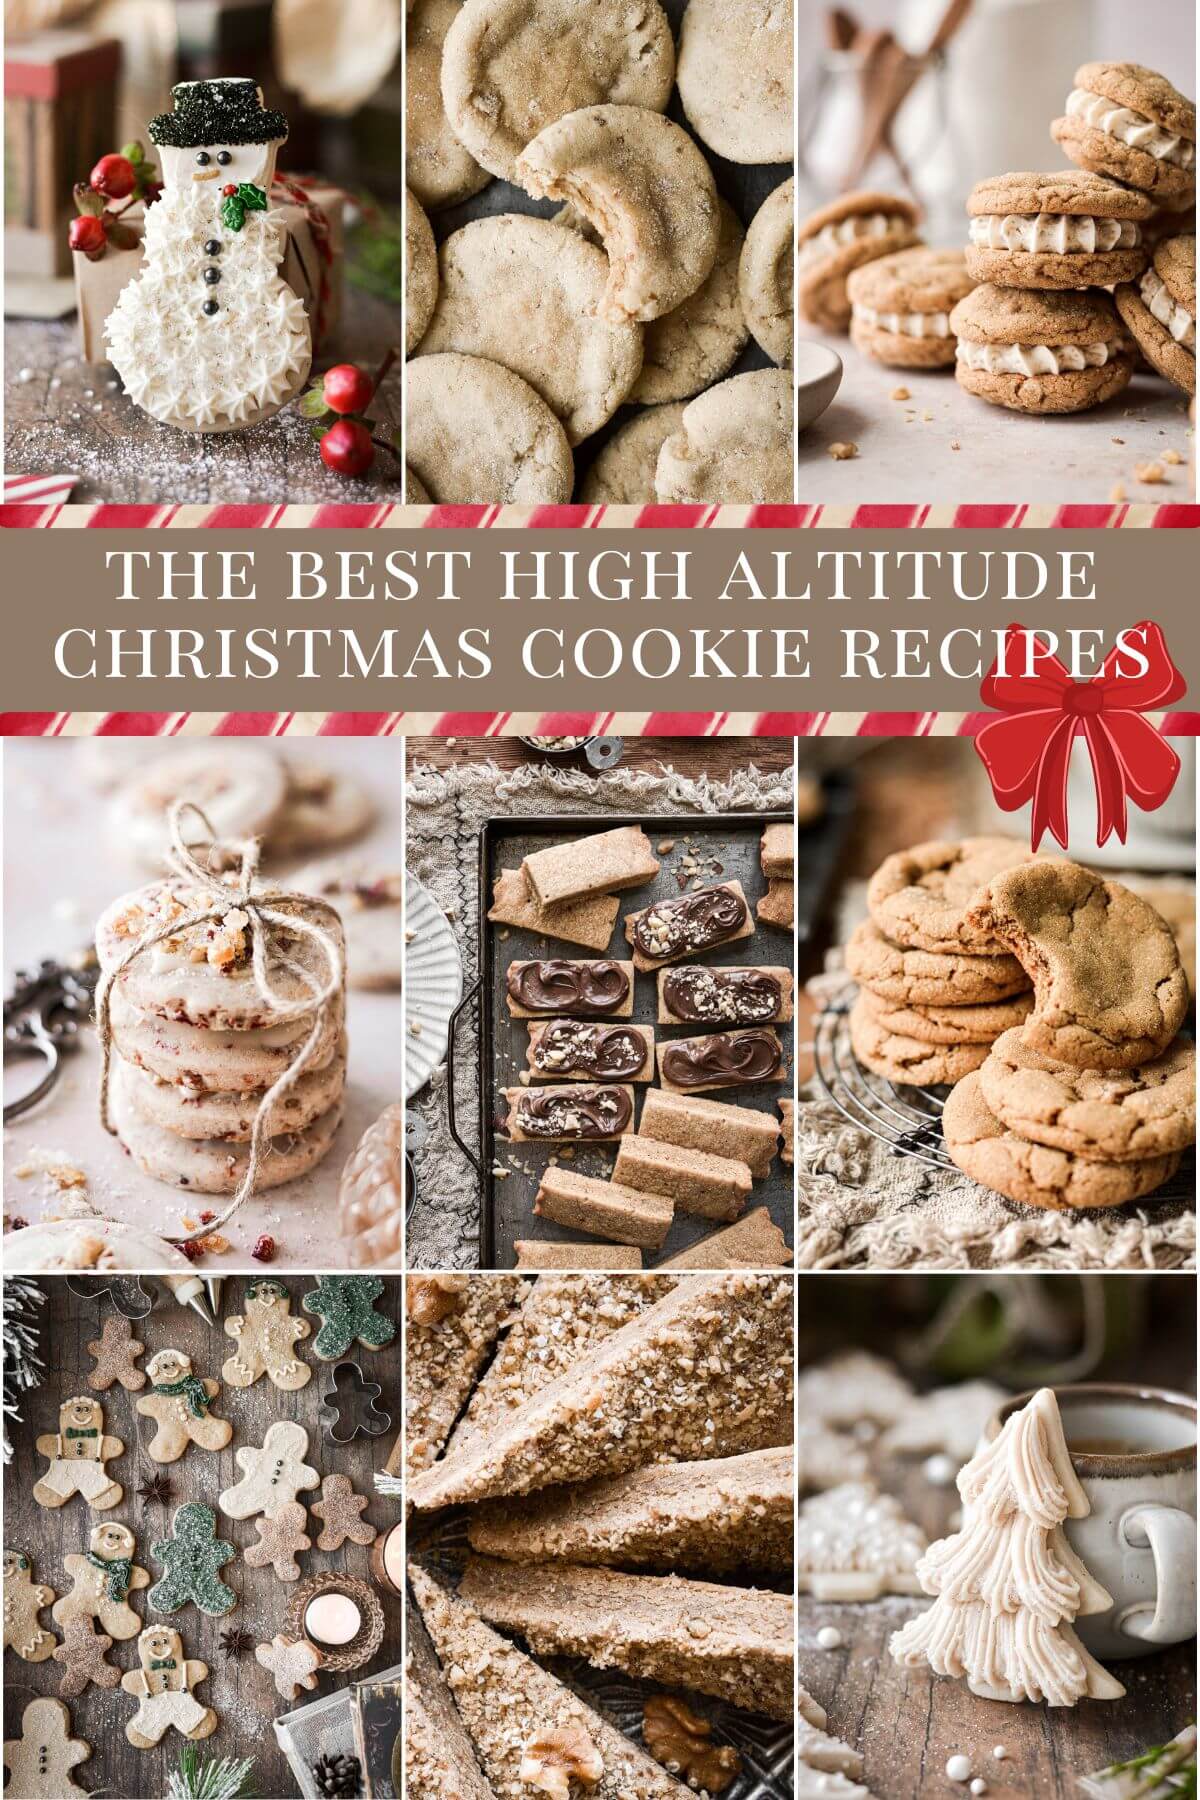 The best high altitude Christmas cookie recipes graphic.